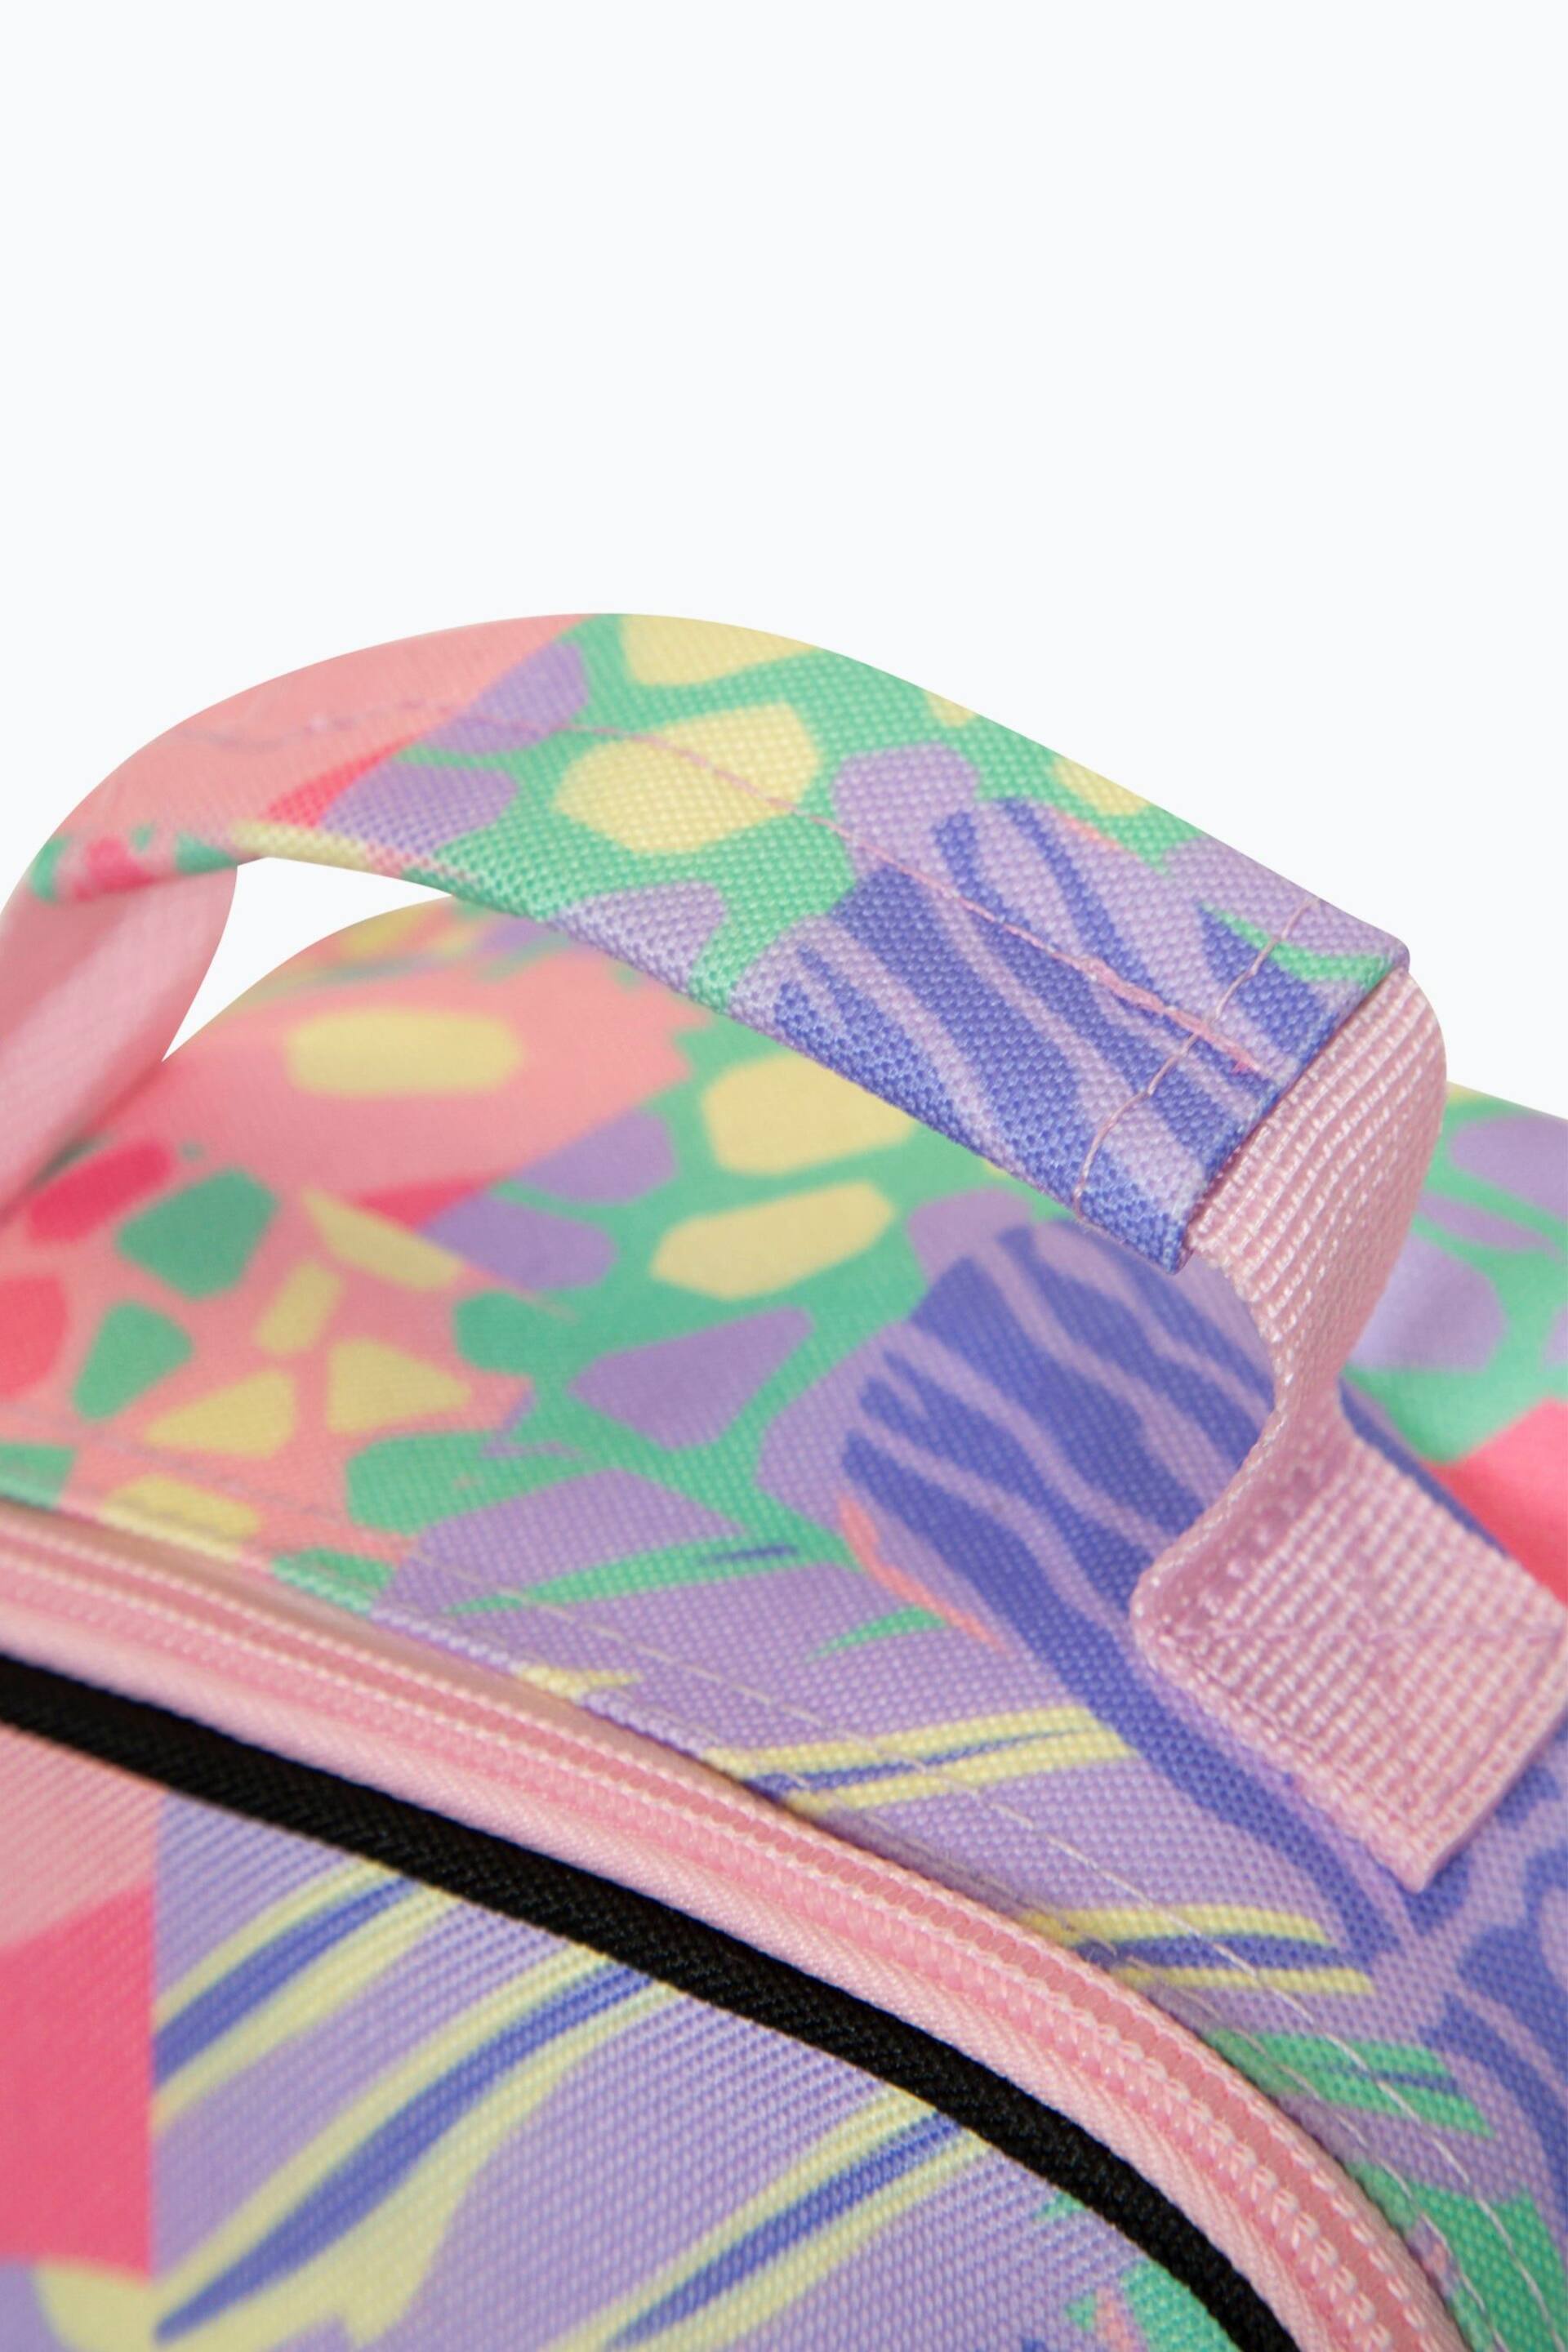 Hype. Multi Pastel Prints Lunch Box - Image 7 of 9